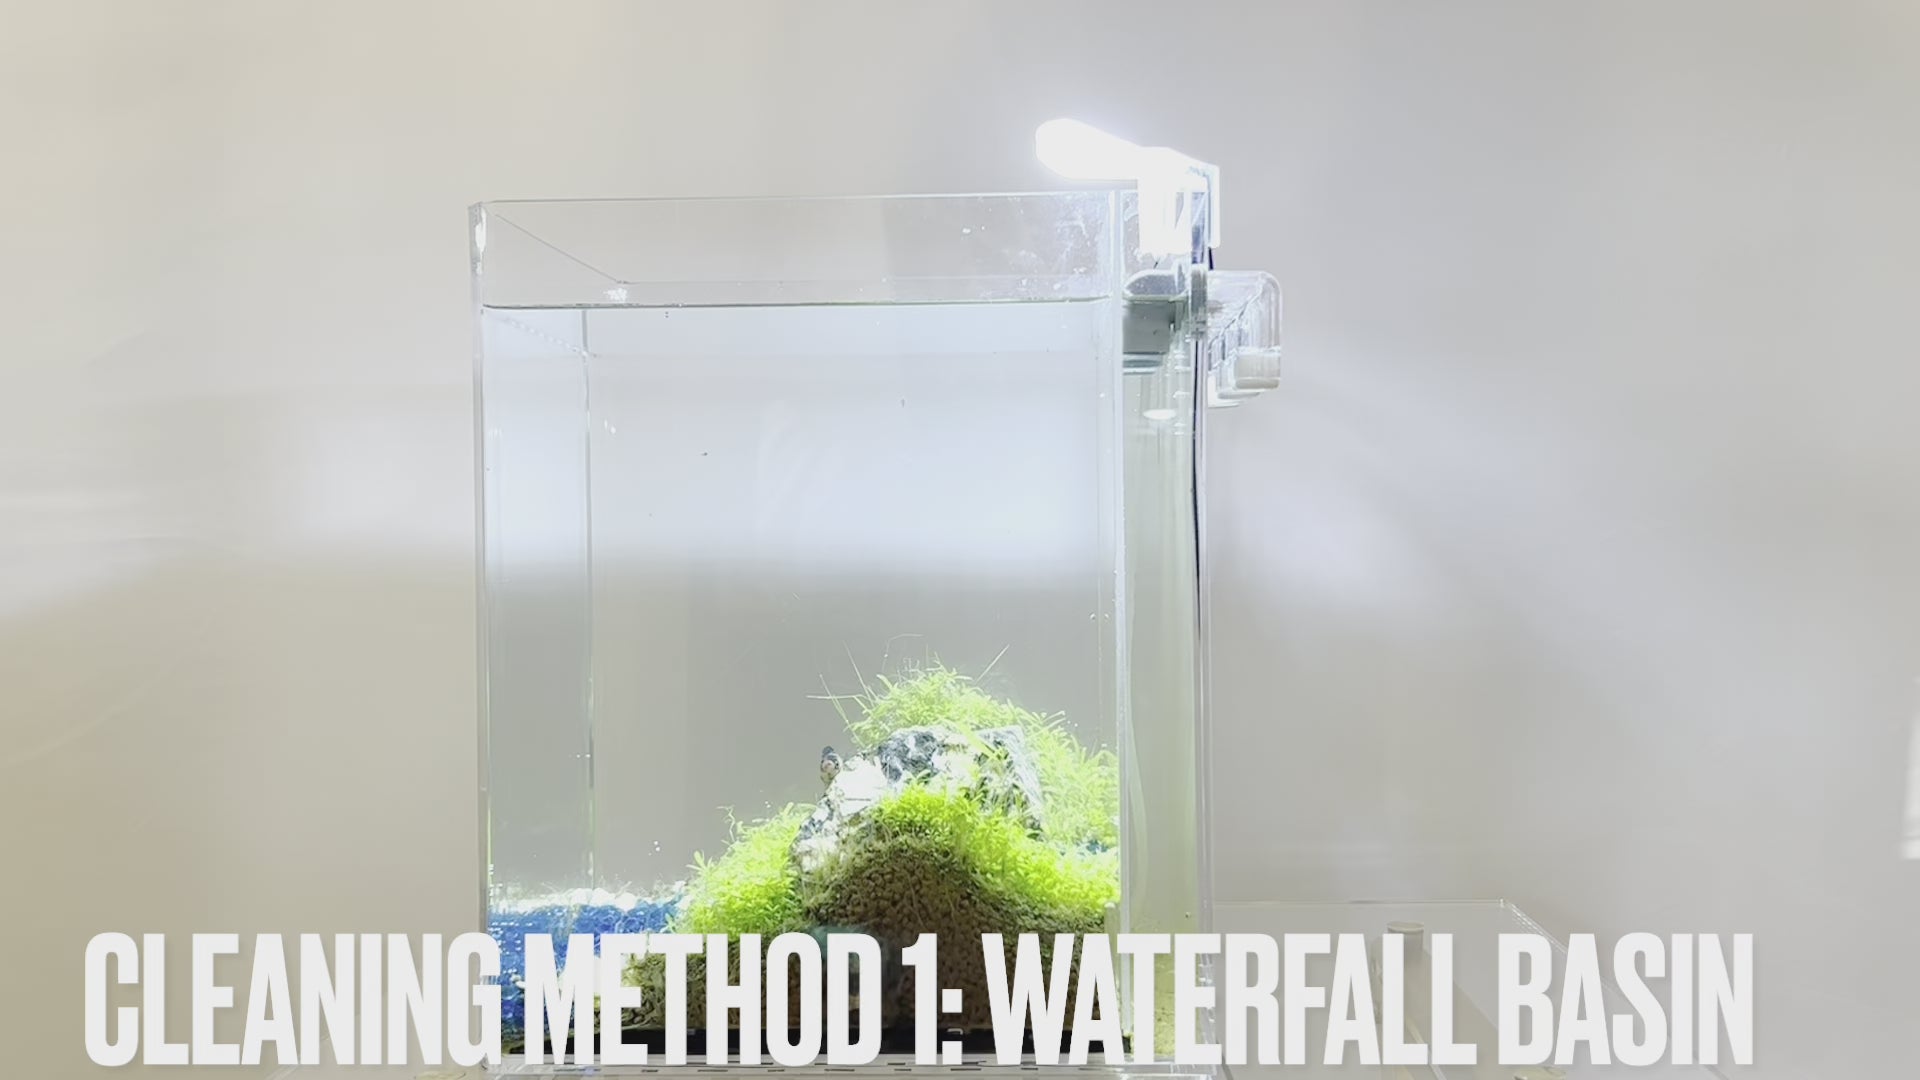 WATERFALL BASIN, Easy Water Changes